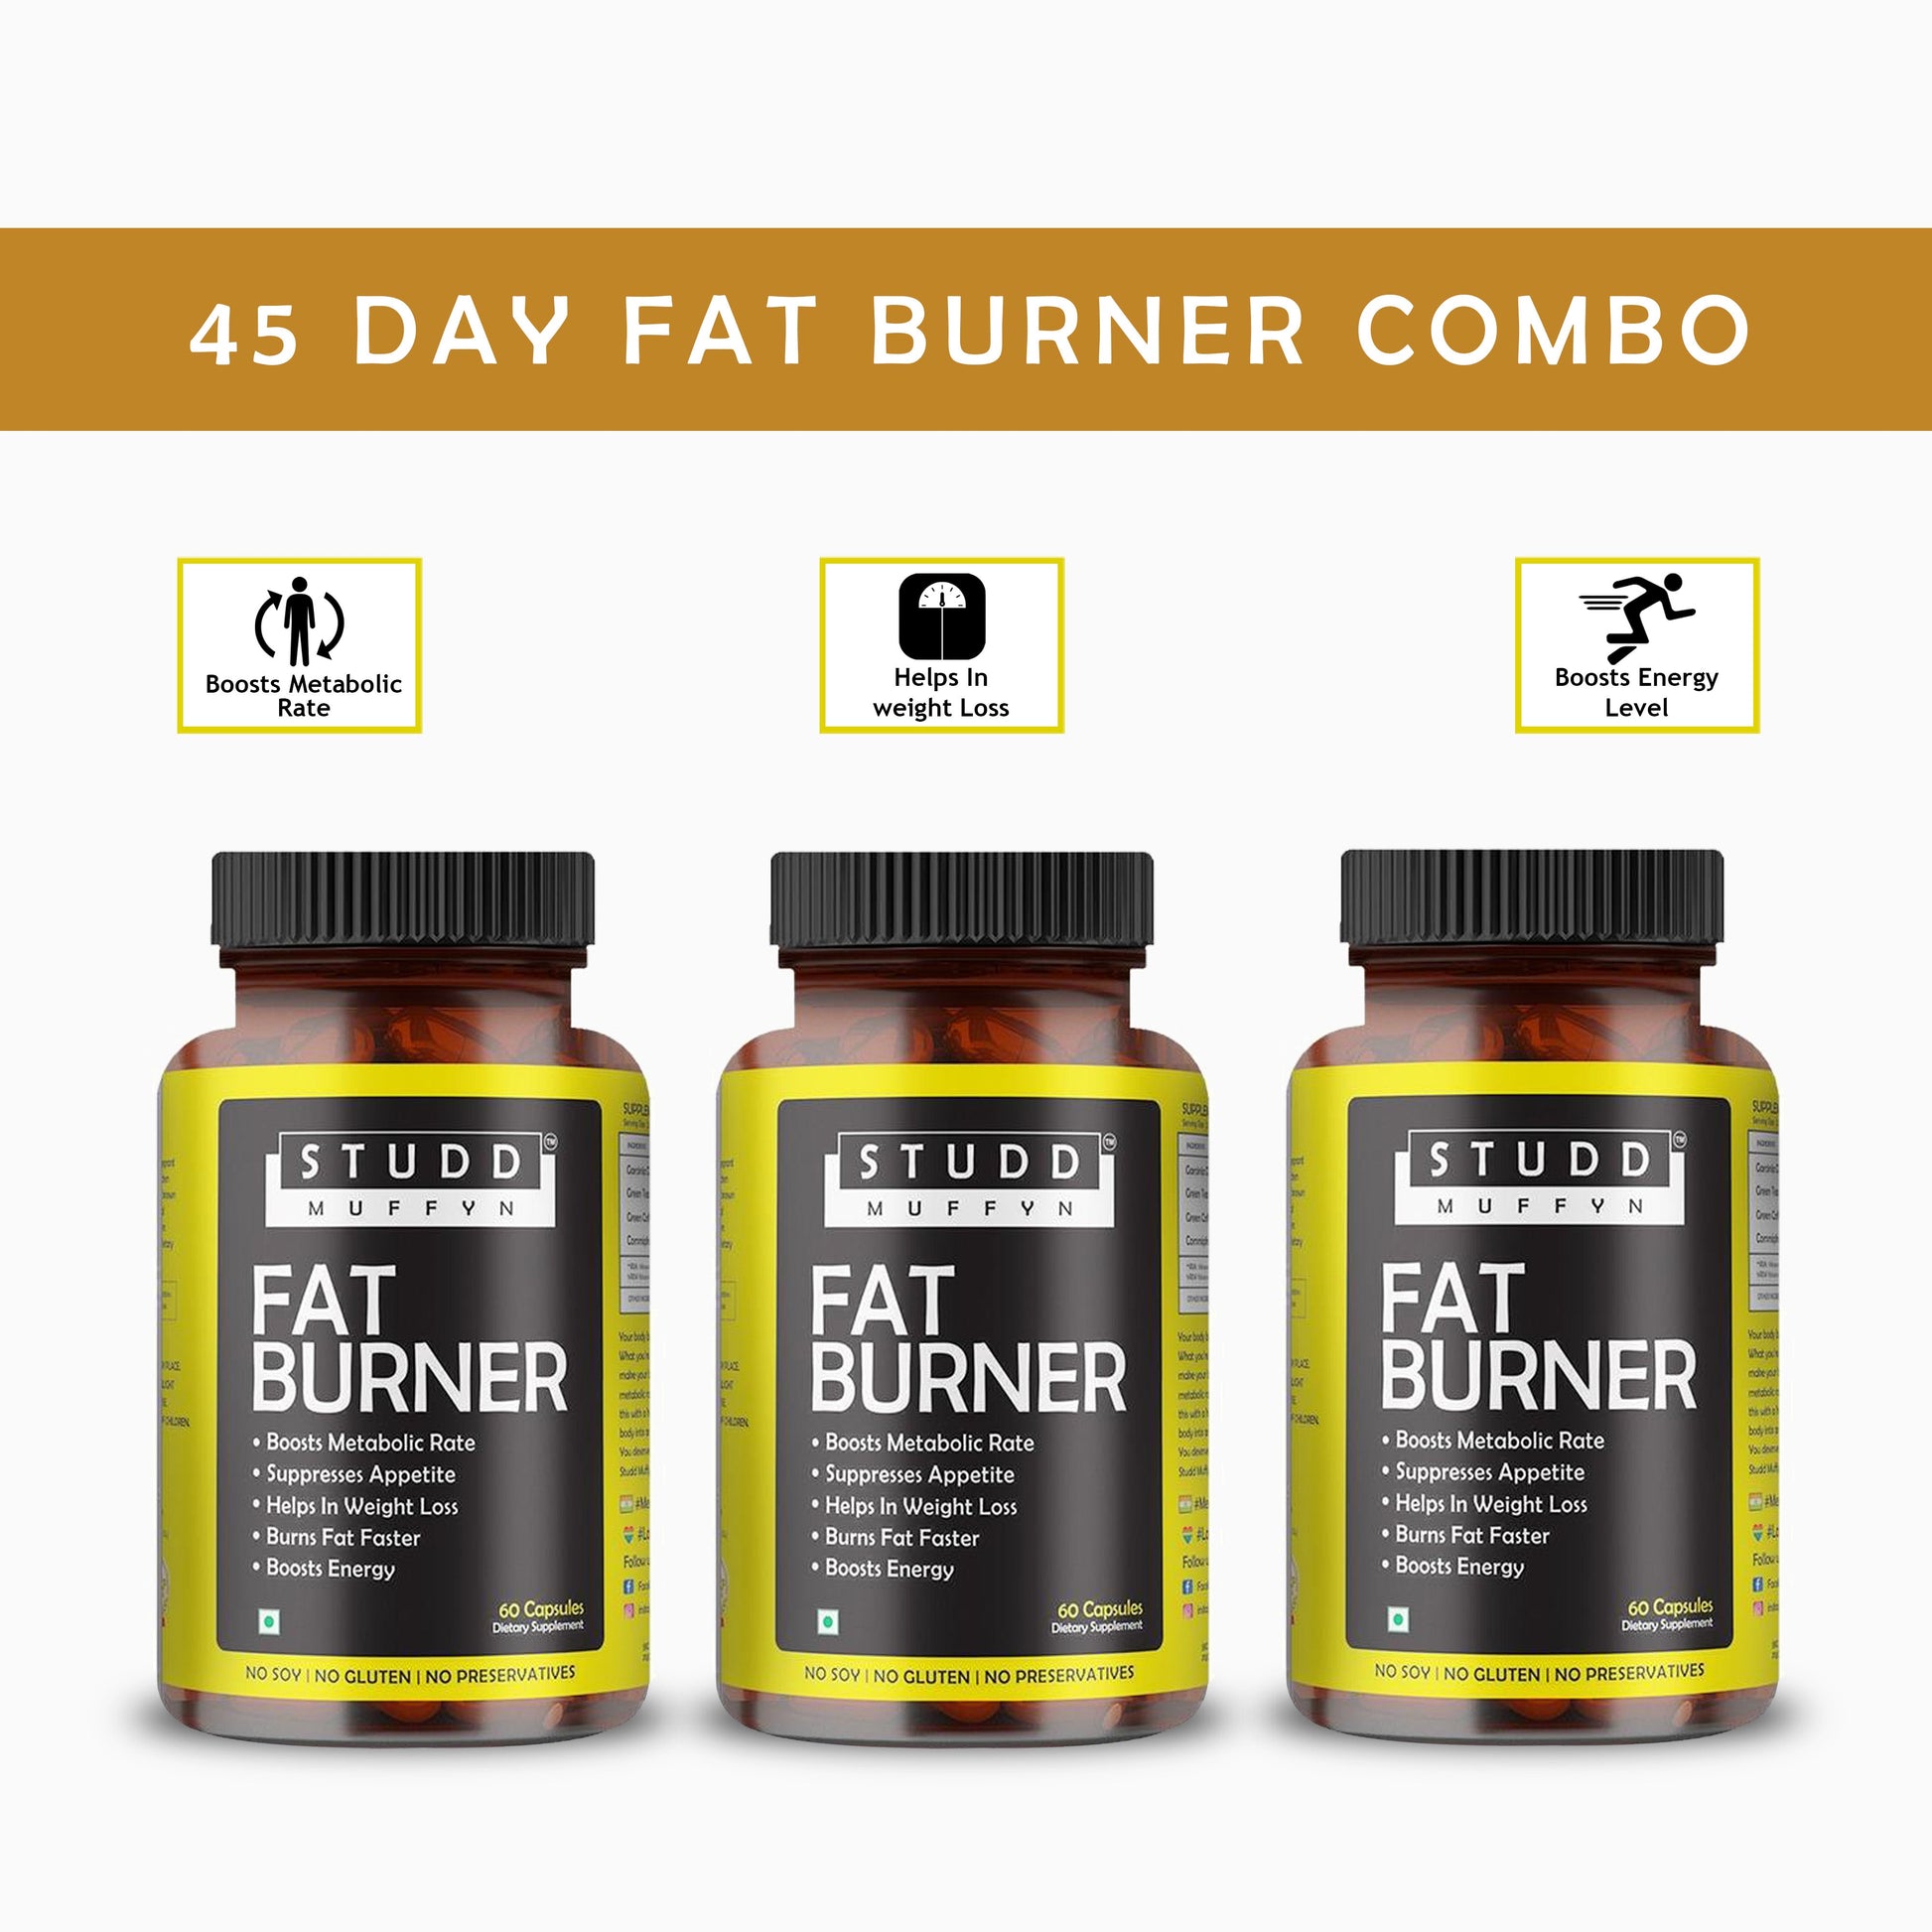 45 day fat burner combo with free diet plan (vegetarian!)